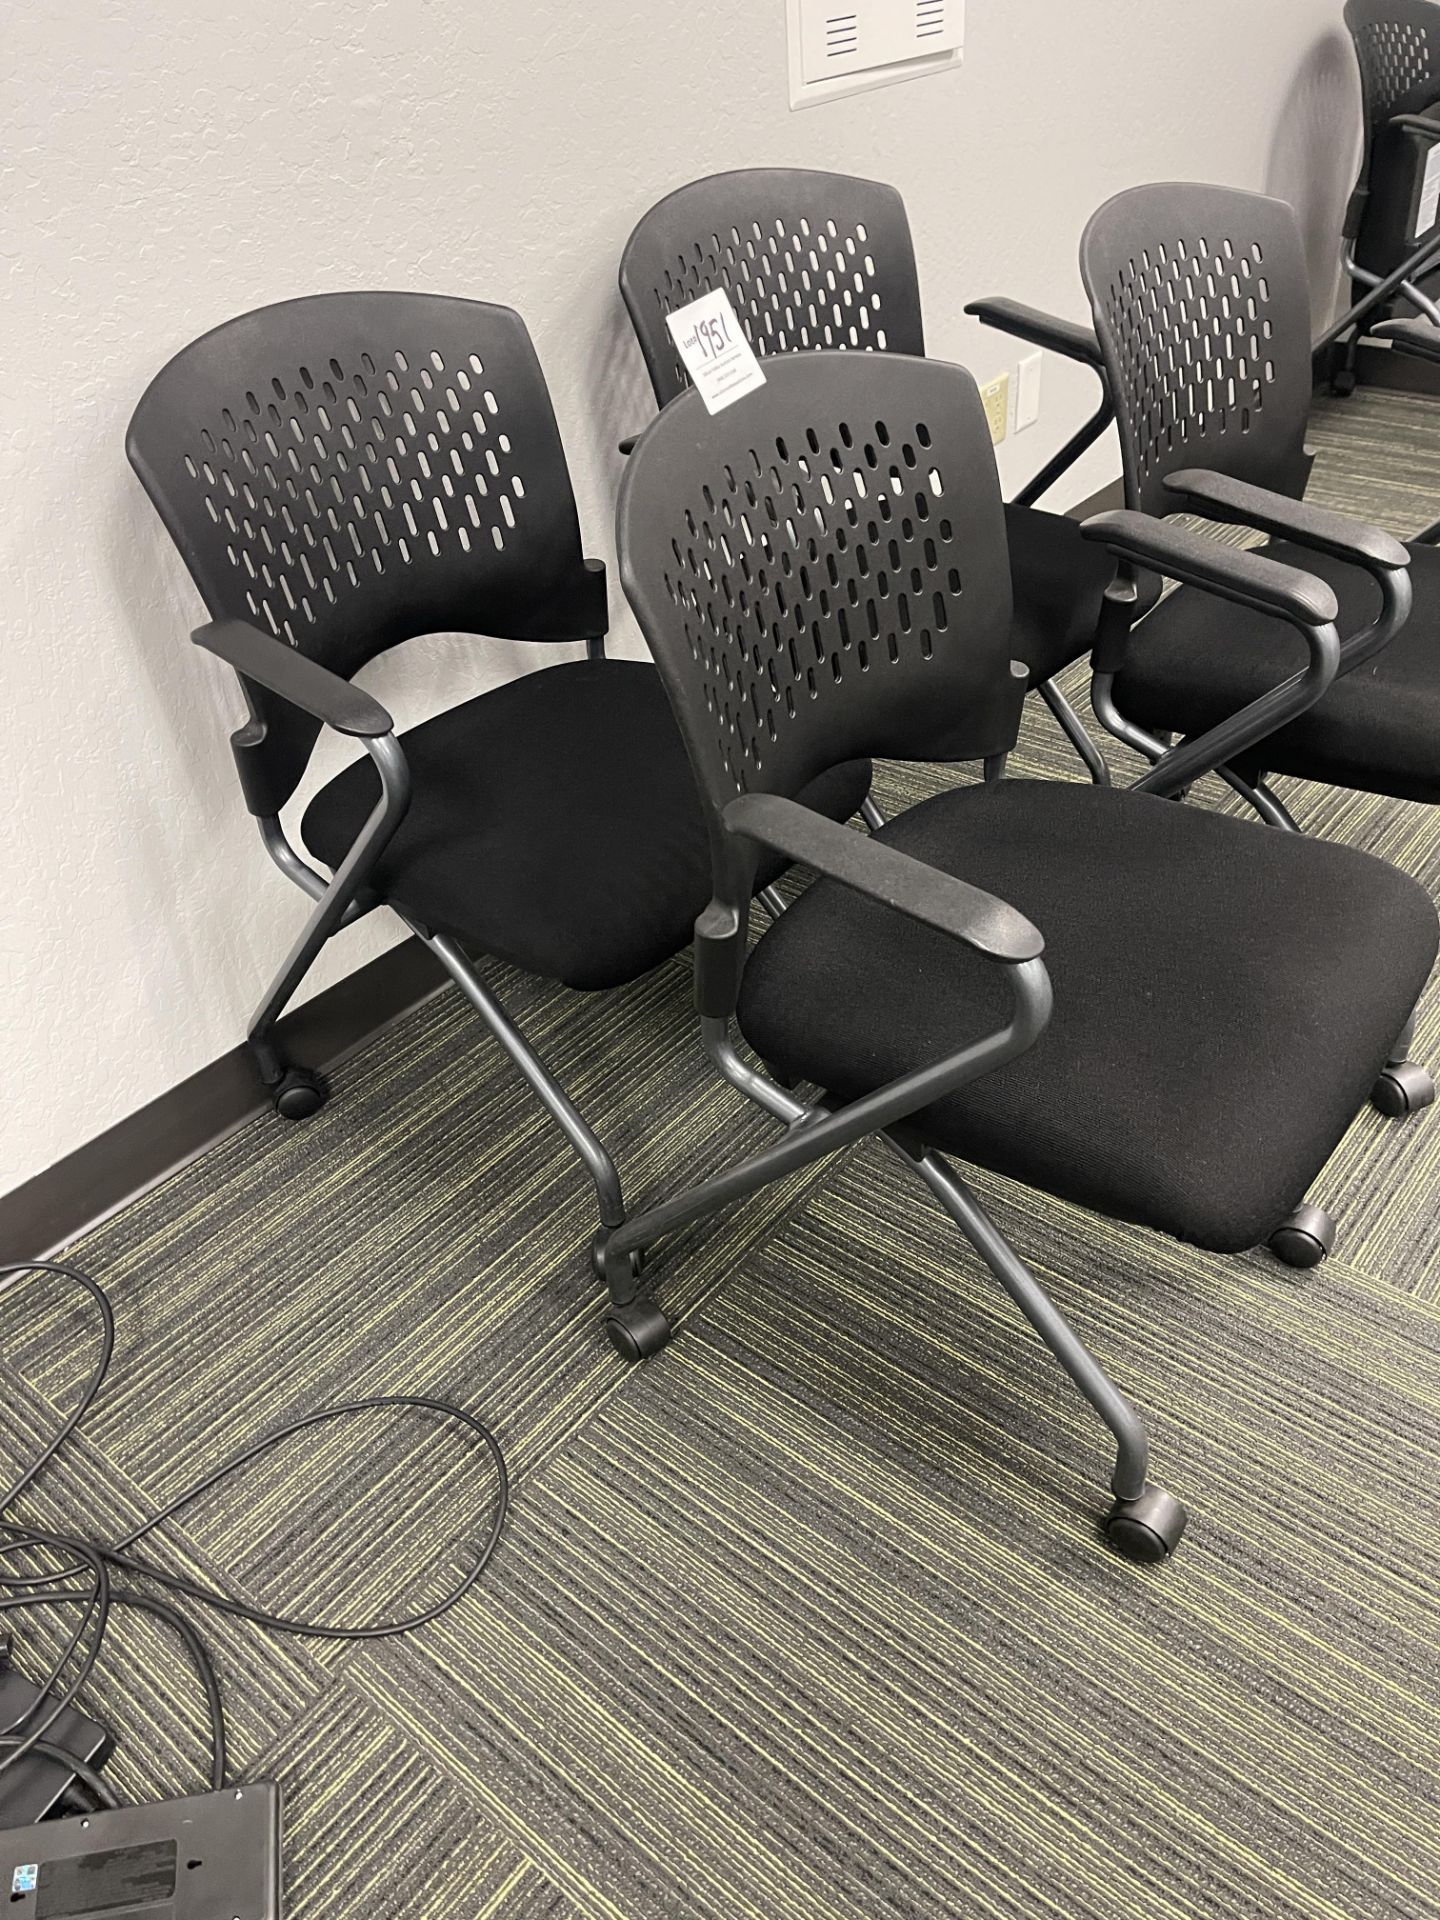 Four Black Desk Chairs with arms - Image 2 of 2